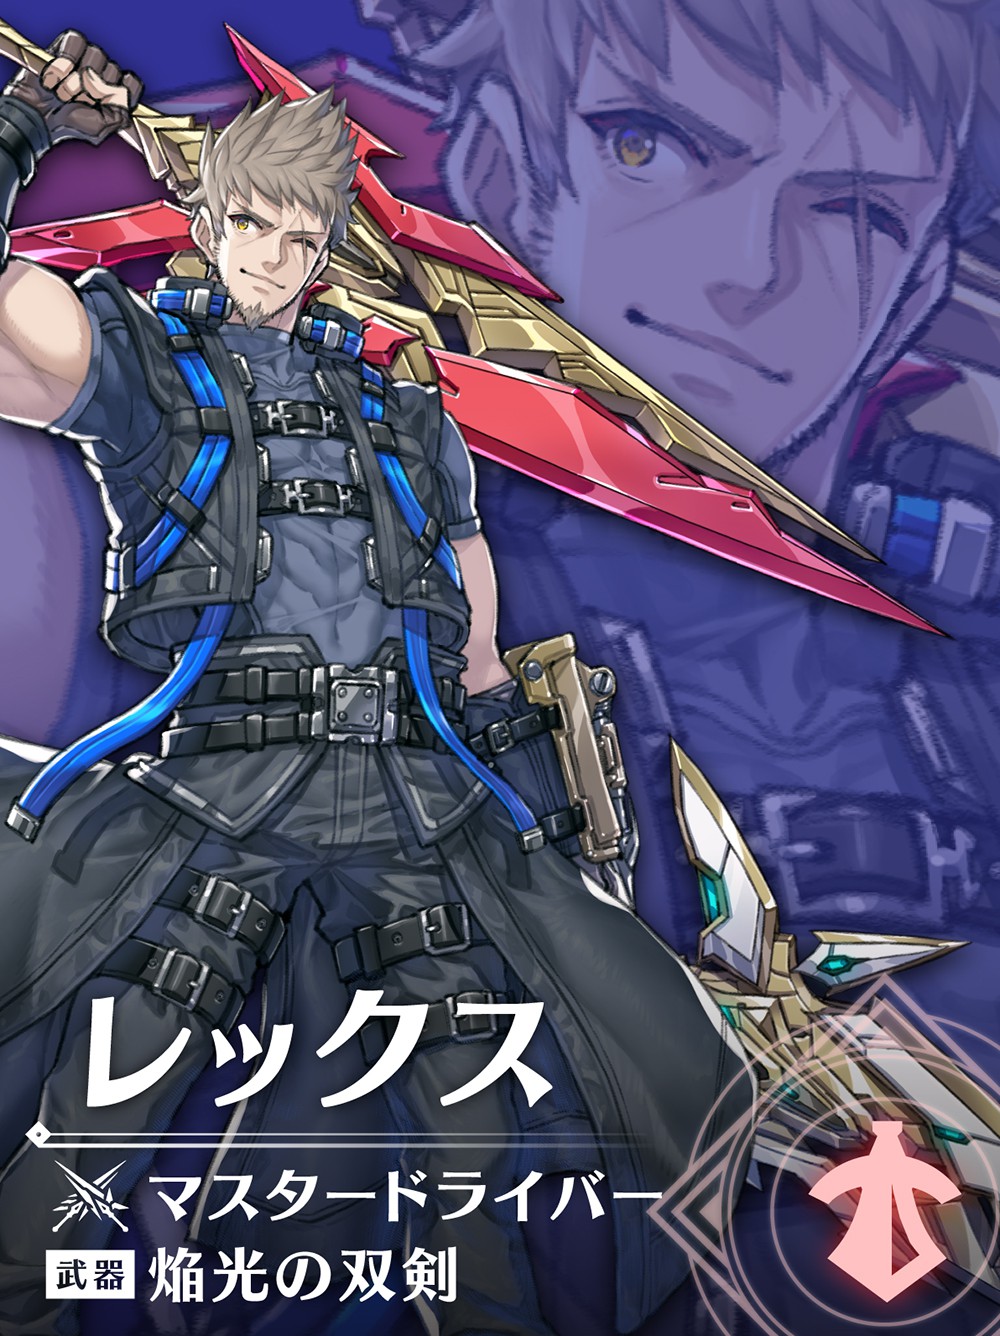 Xenoblade Chronicles 3 Future Redeemed DLC launches April 25